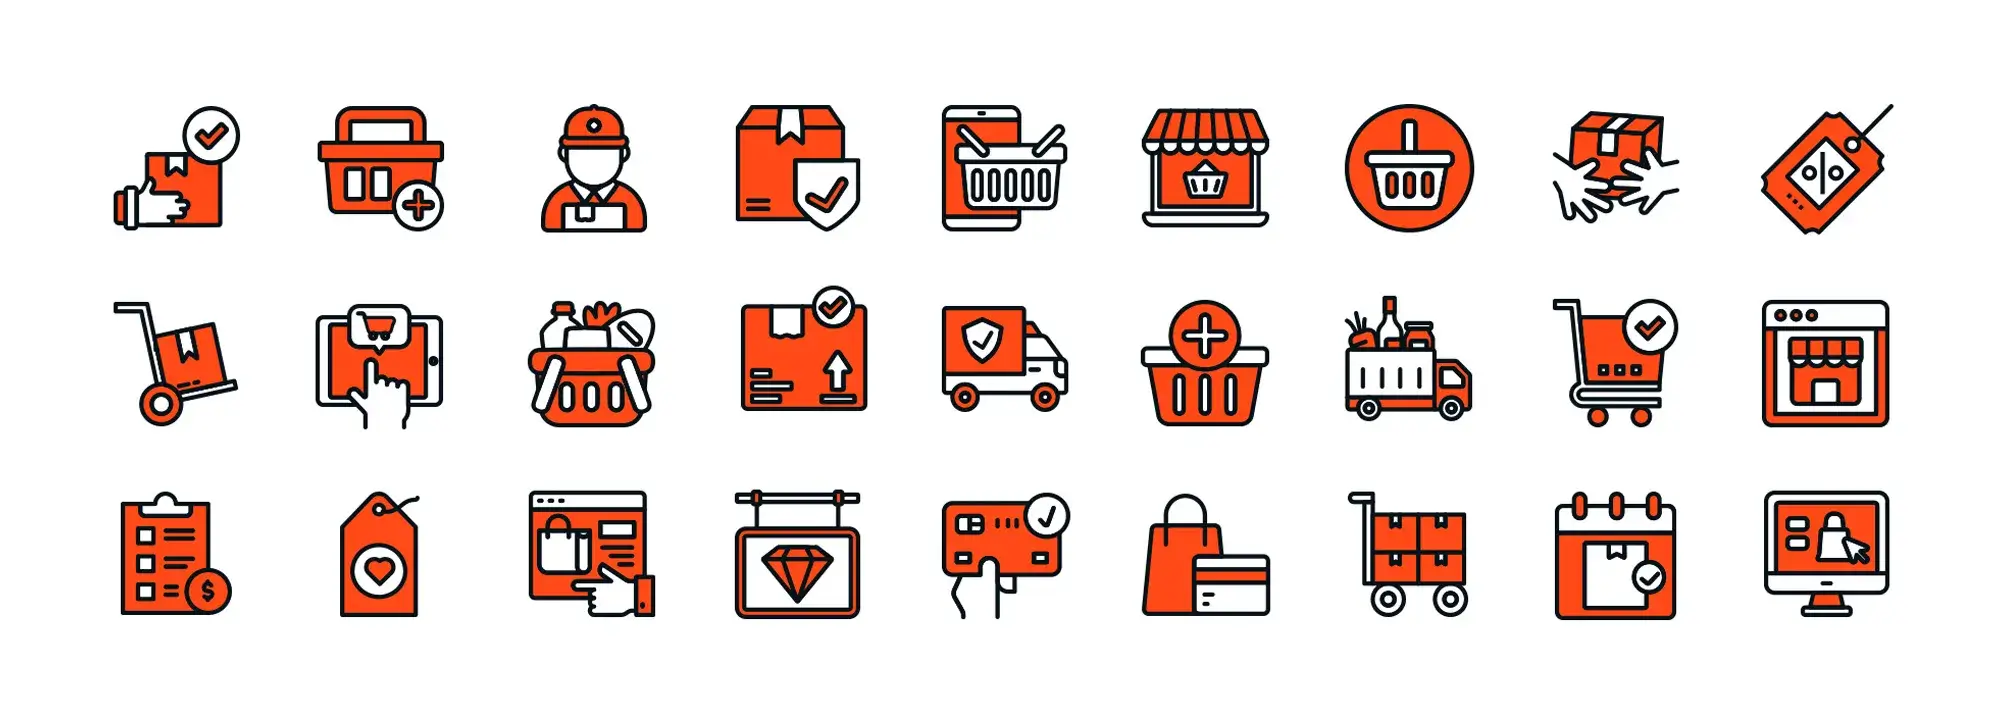 Extensive selection of free WordPress icons for web designers